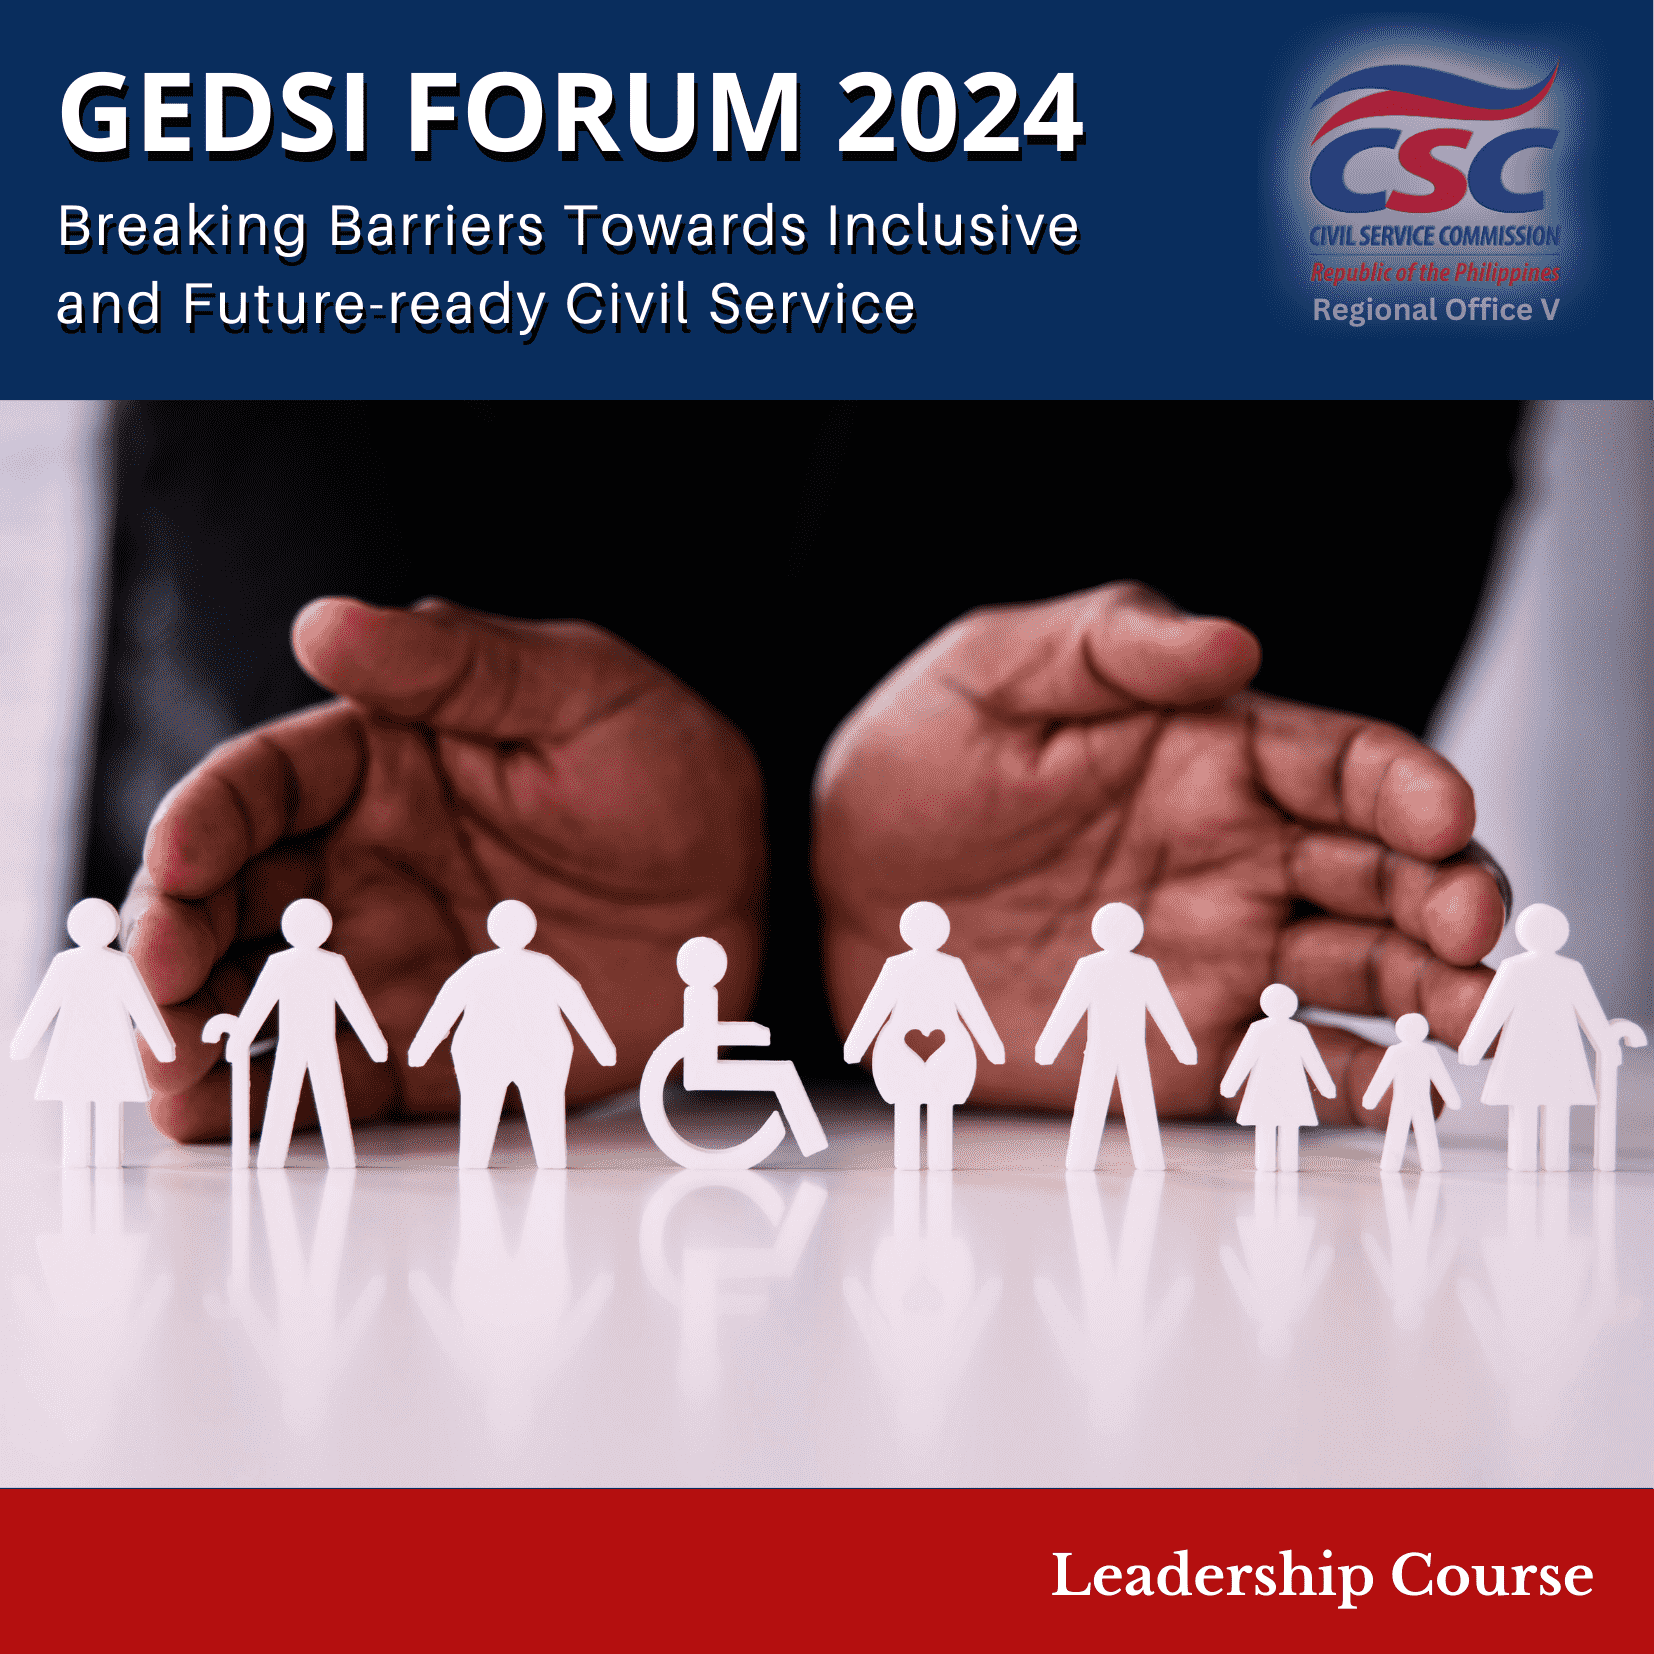 2024 Regional Gender Equality, Disability, and Social Inclusion (GEDSI) Leadership Summit